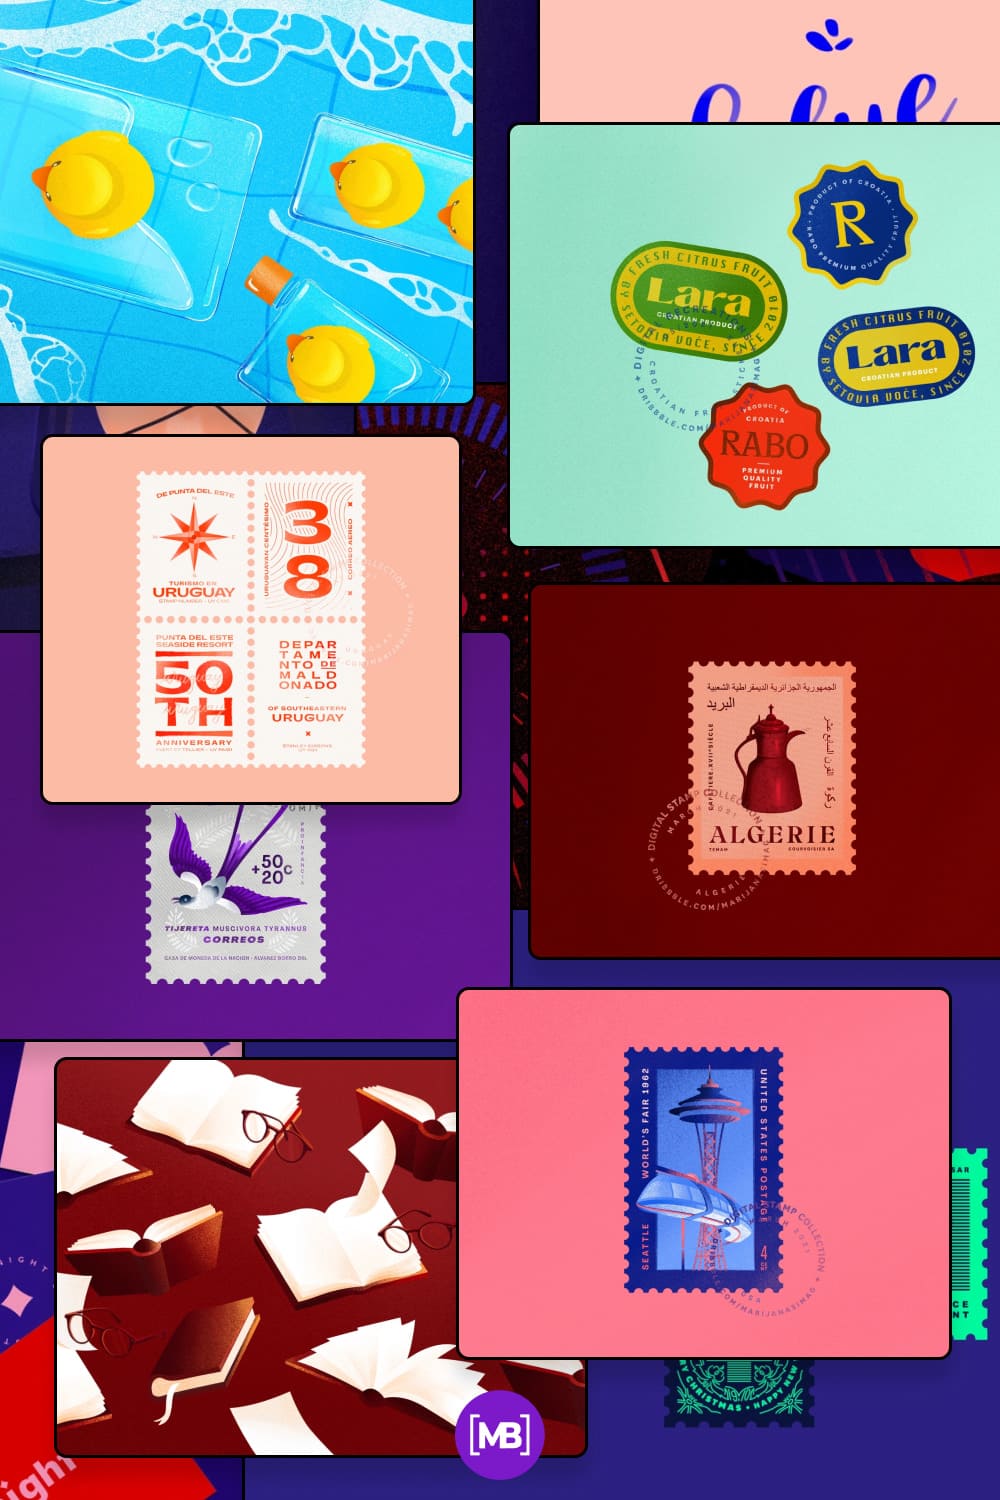 Super cool design with a creative idea - each illustration is presented in the style of a letter stamp.